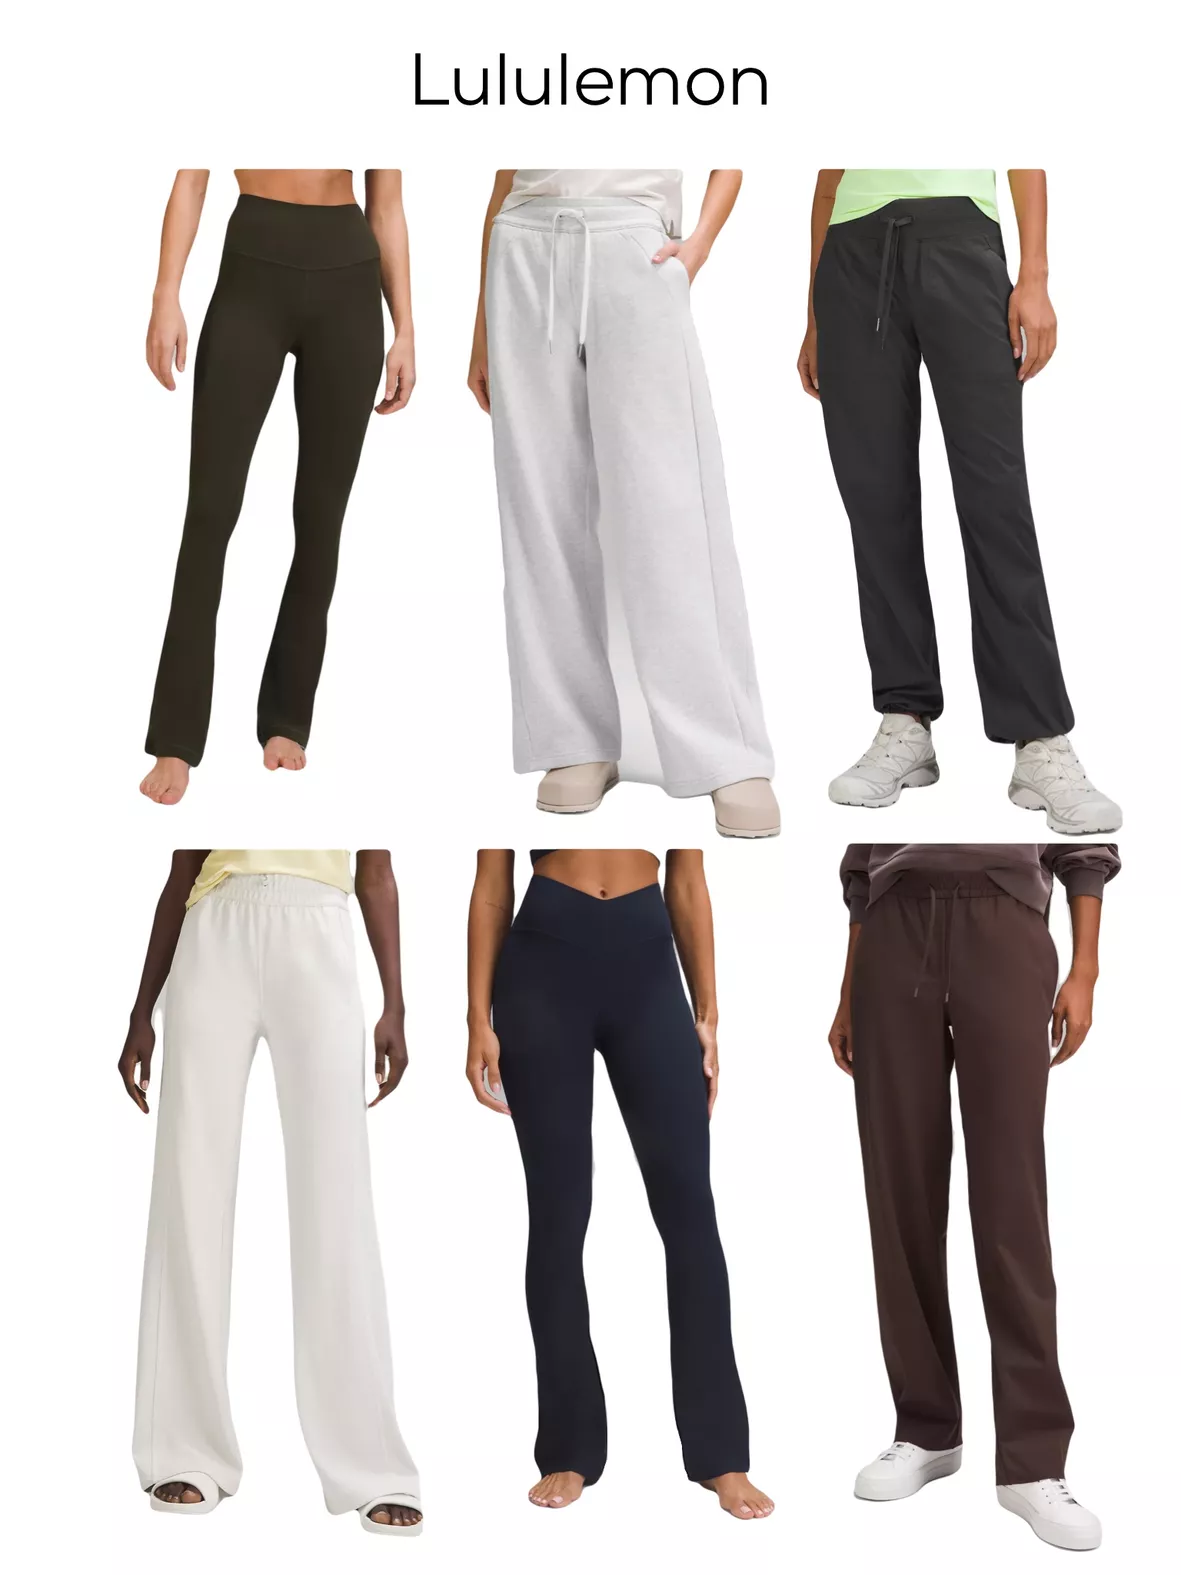 Athletic Works Women's Wide Leg Pants Available in Regular and